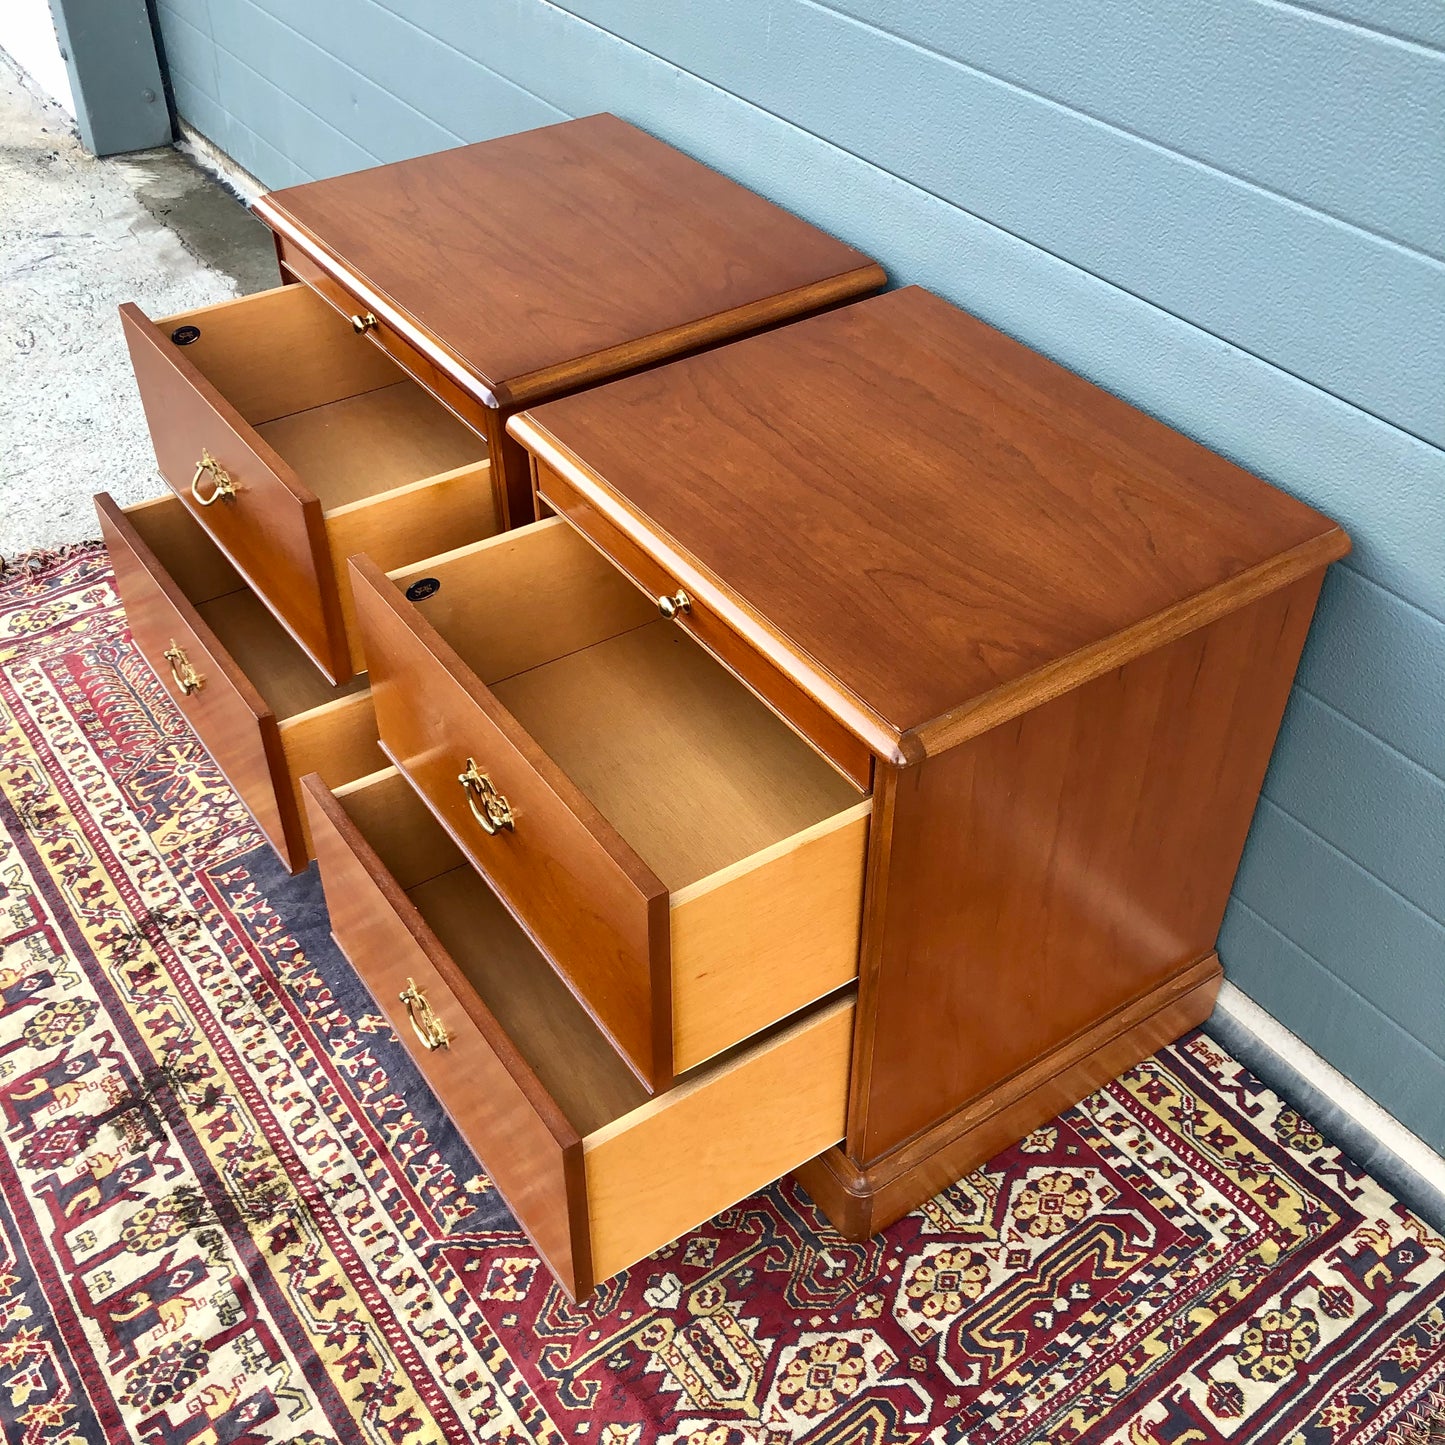 Pair Of Stag Bedside Chests / Stag Bedside Cabinets ( SOLD )